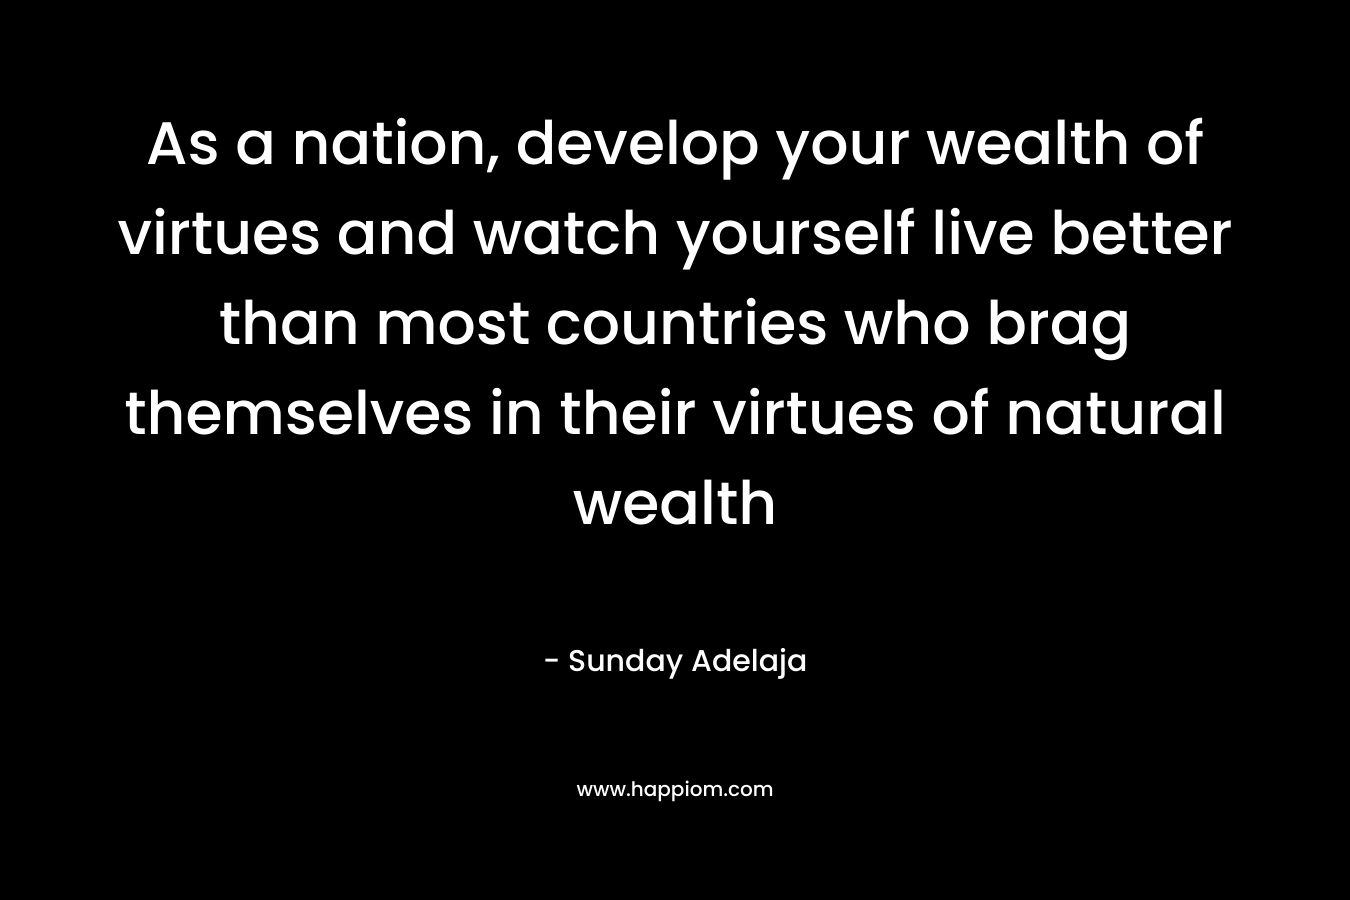 As a nation, develop your wealth of virtues and watch yourself live better than most countries who brag themselves in their virtues of natural wealth